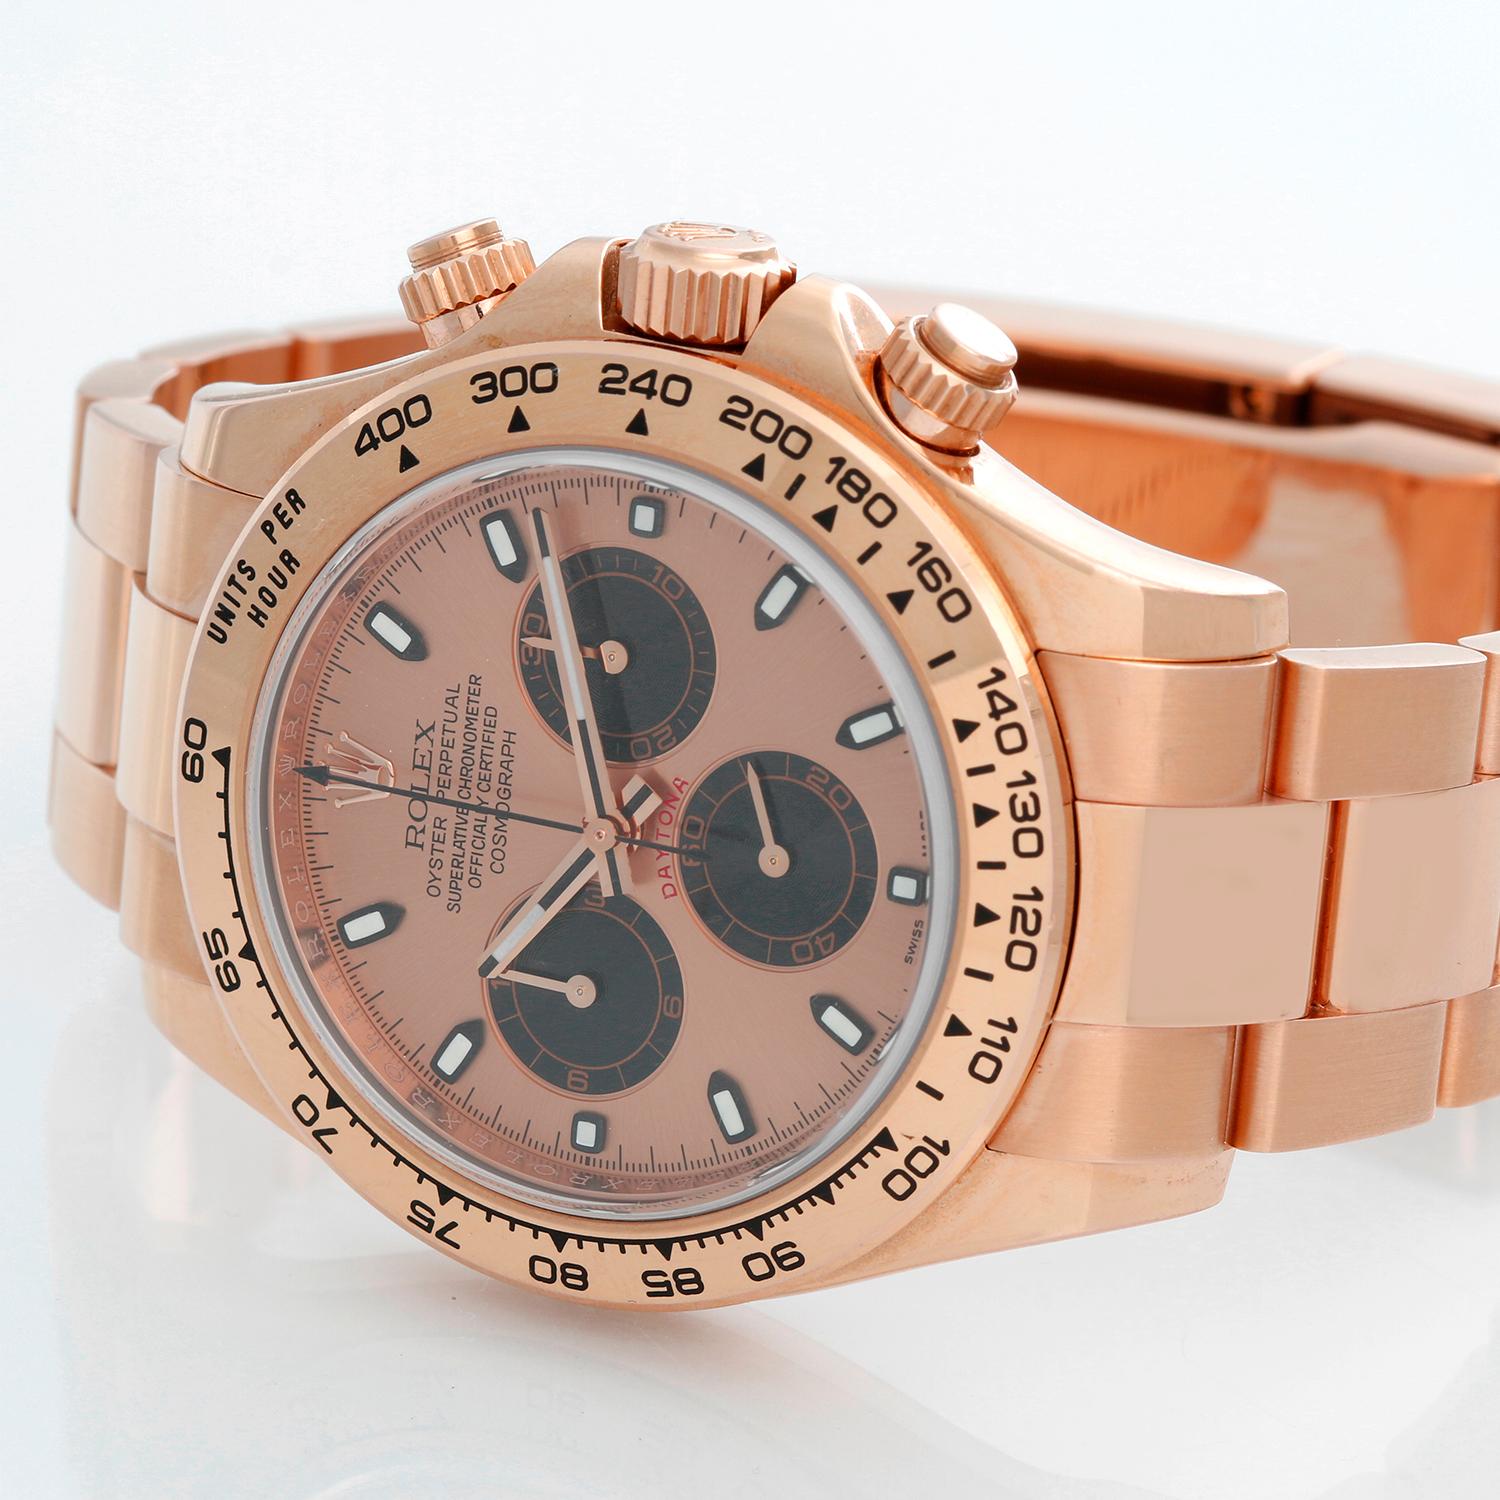 Rolex Everose Cosmograph Daytona Men's Rose Gold Watch Black Subdials 116505 - Automatic winding, 44 jewel chronometer, chronograph. 18k rose gold case with tachymeter engraved bezel (40mm diameter). Rose gold dial with raised baton hour markers and